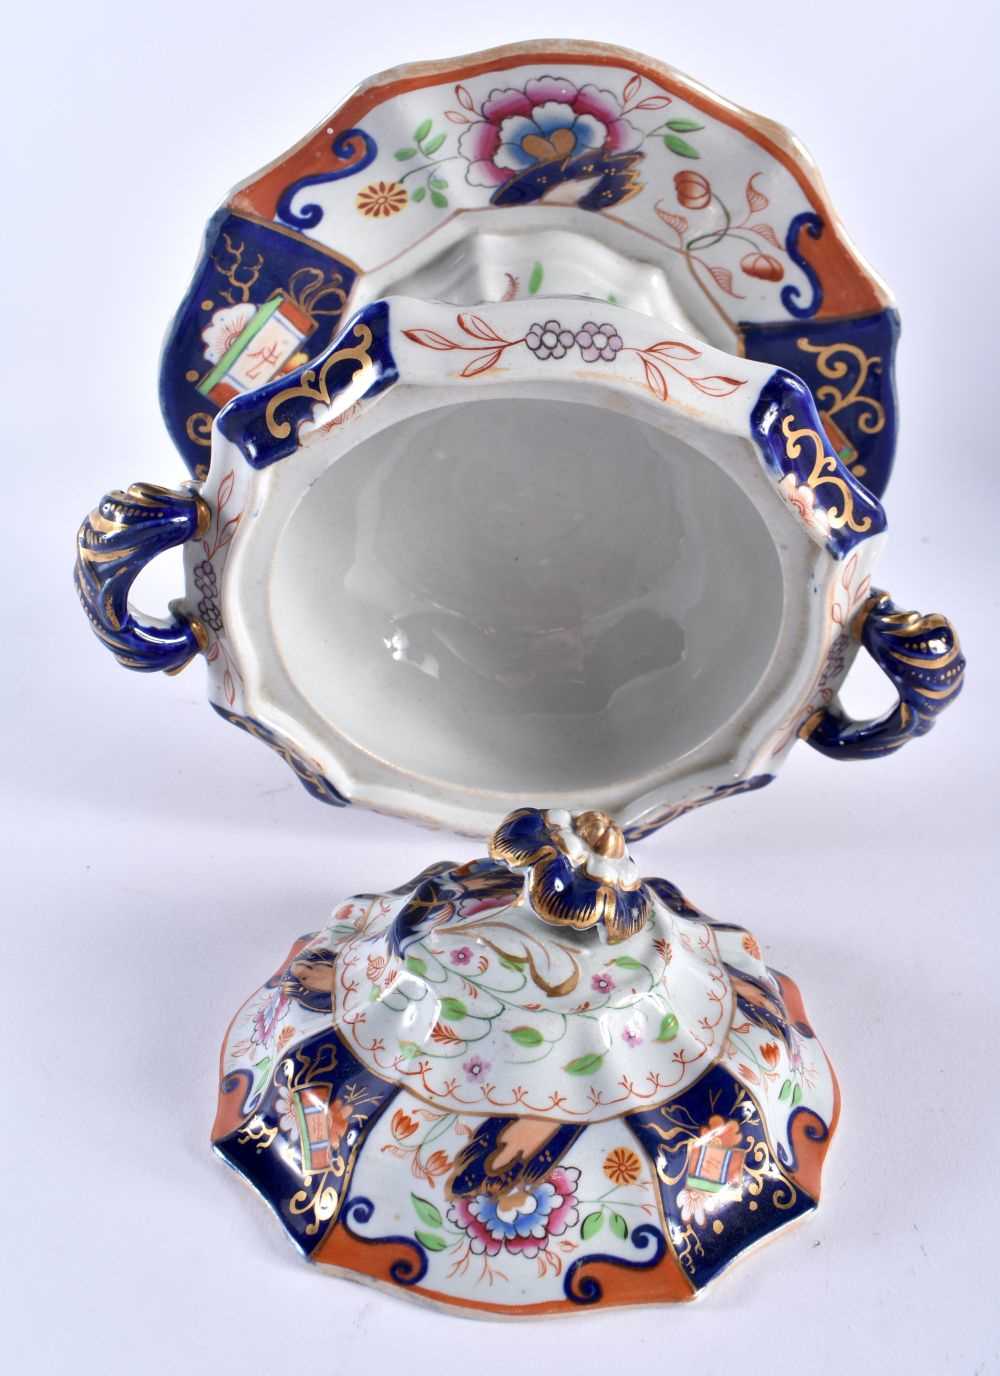 19th century English Ironstone tureen, cover and fixed stand painted in imari style colours - Image 4 of 5